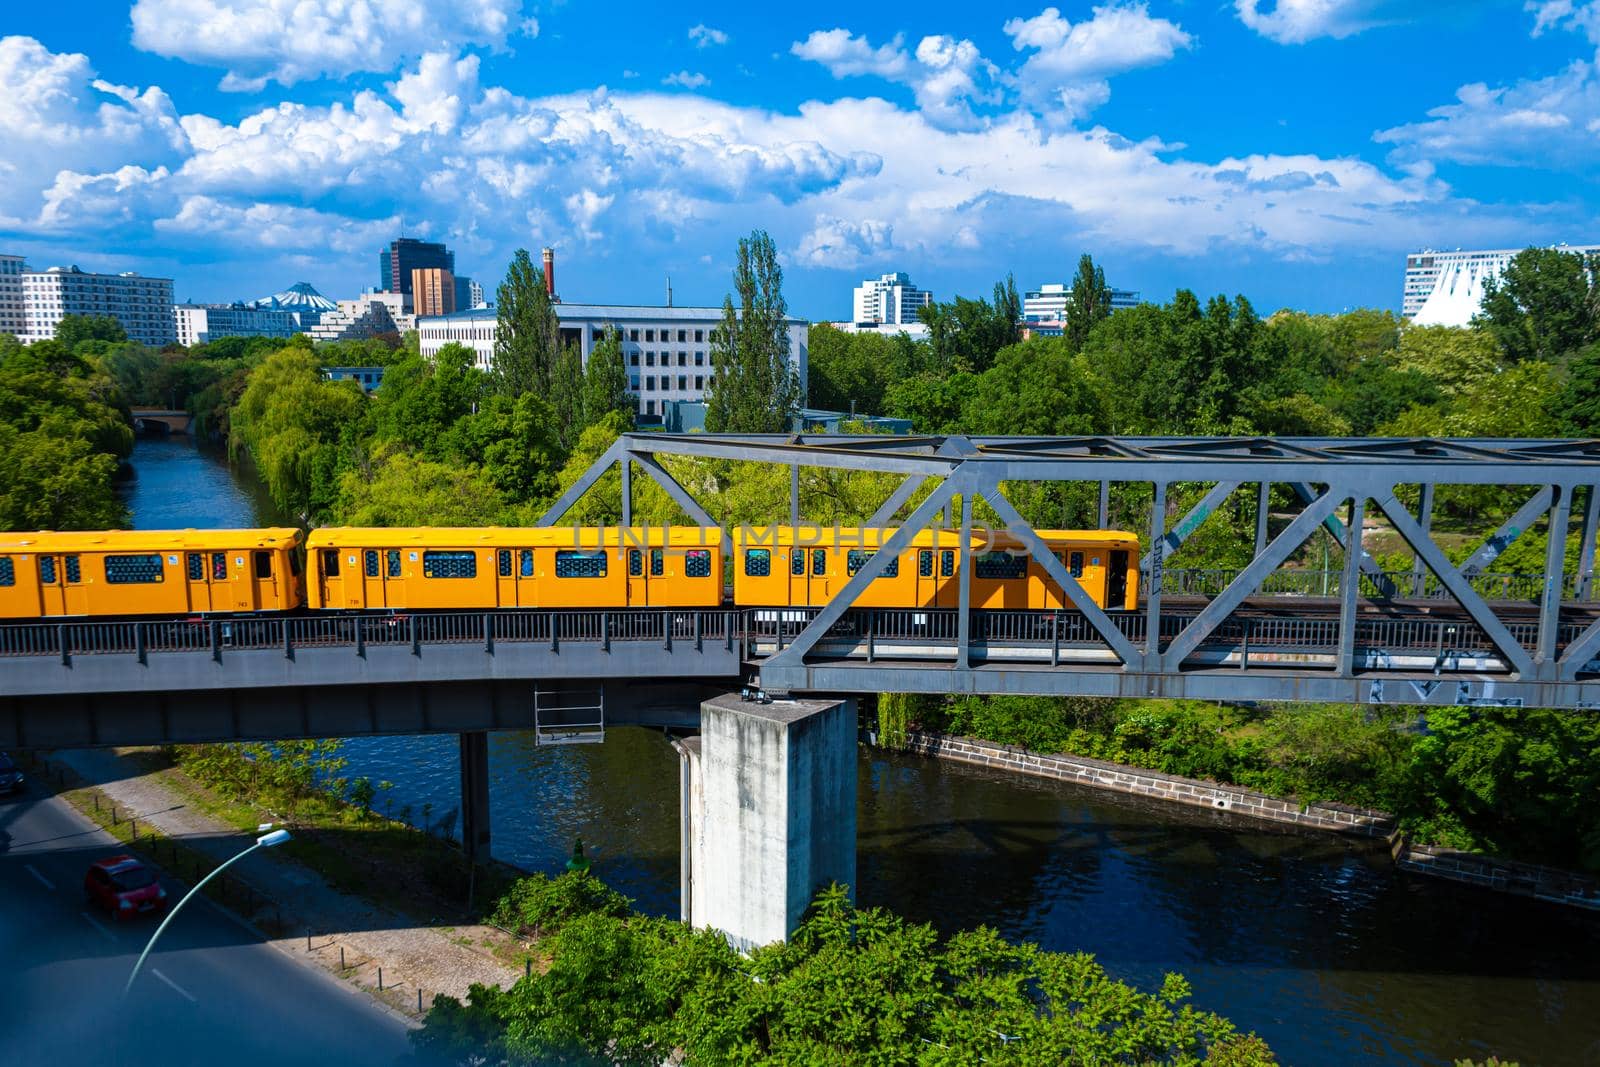 A bright yellow passenger train rides across a bridge over a river by Try_my_best